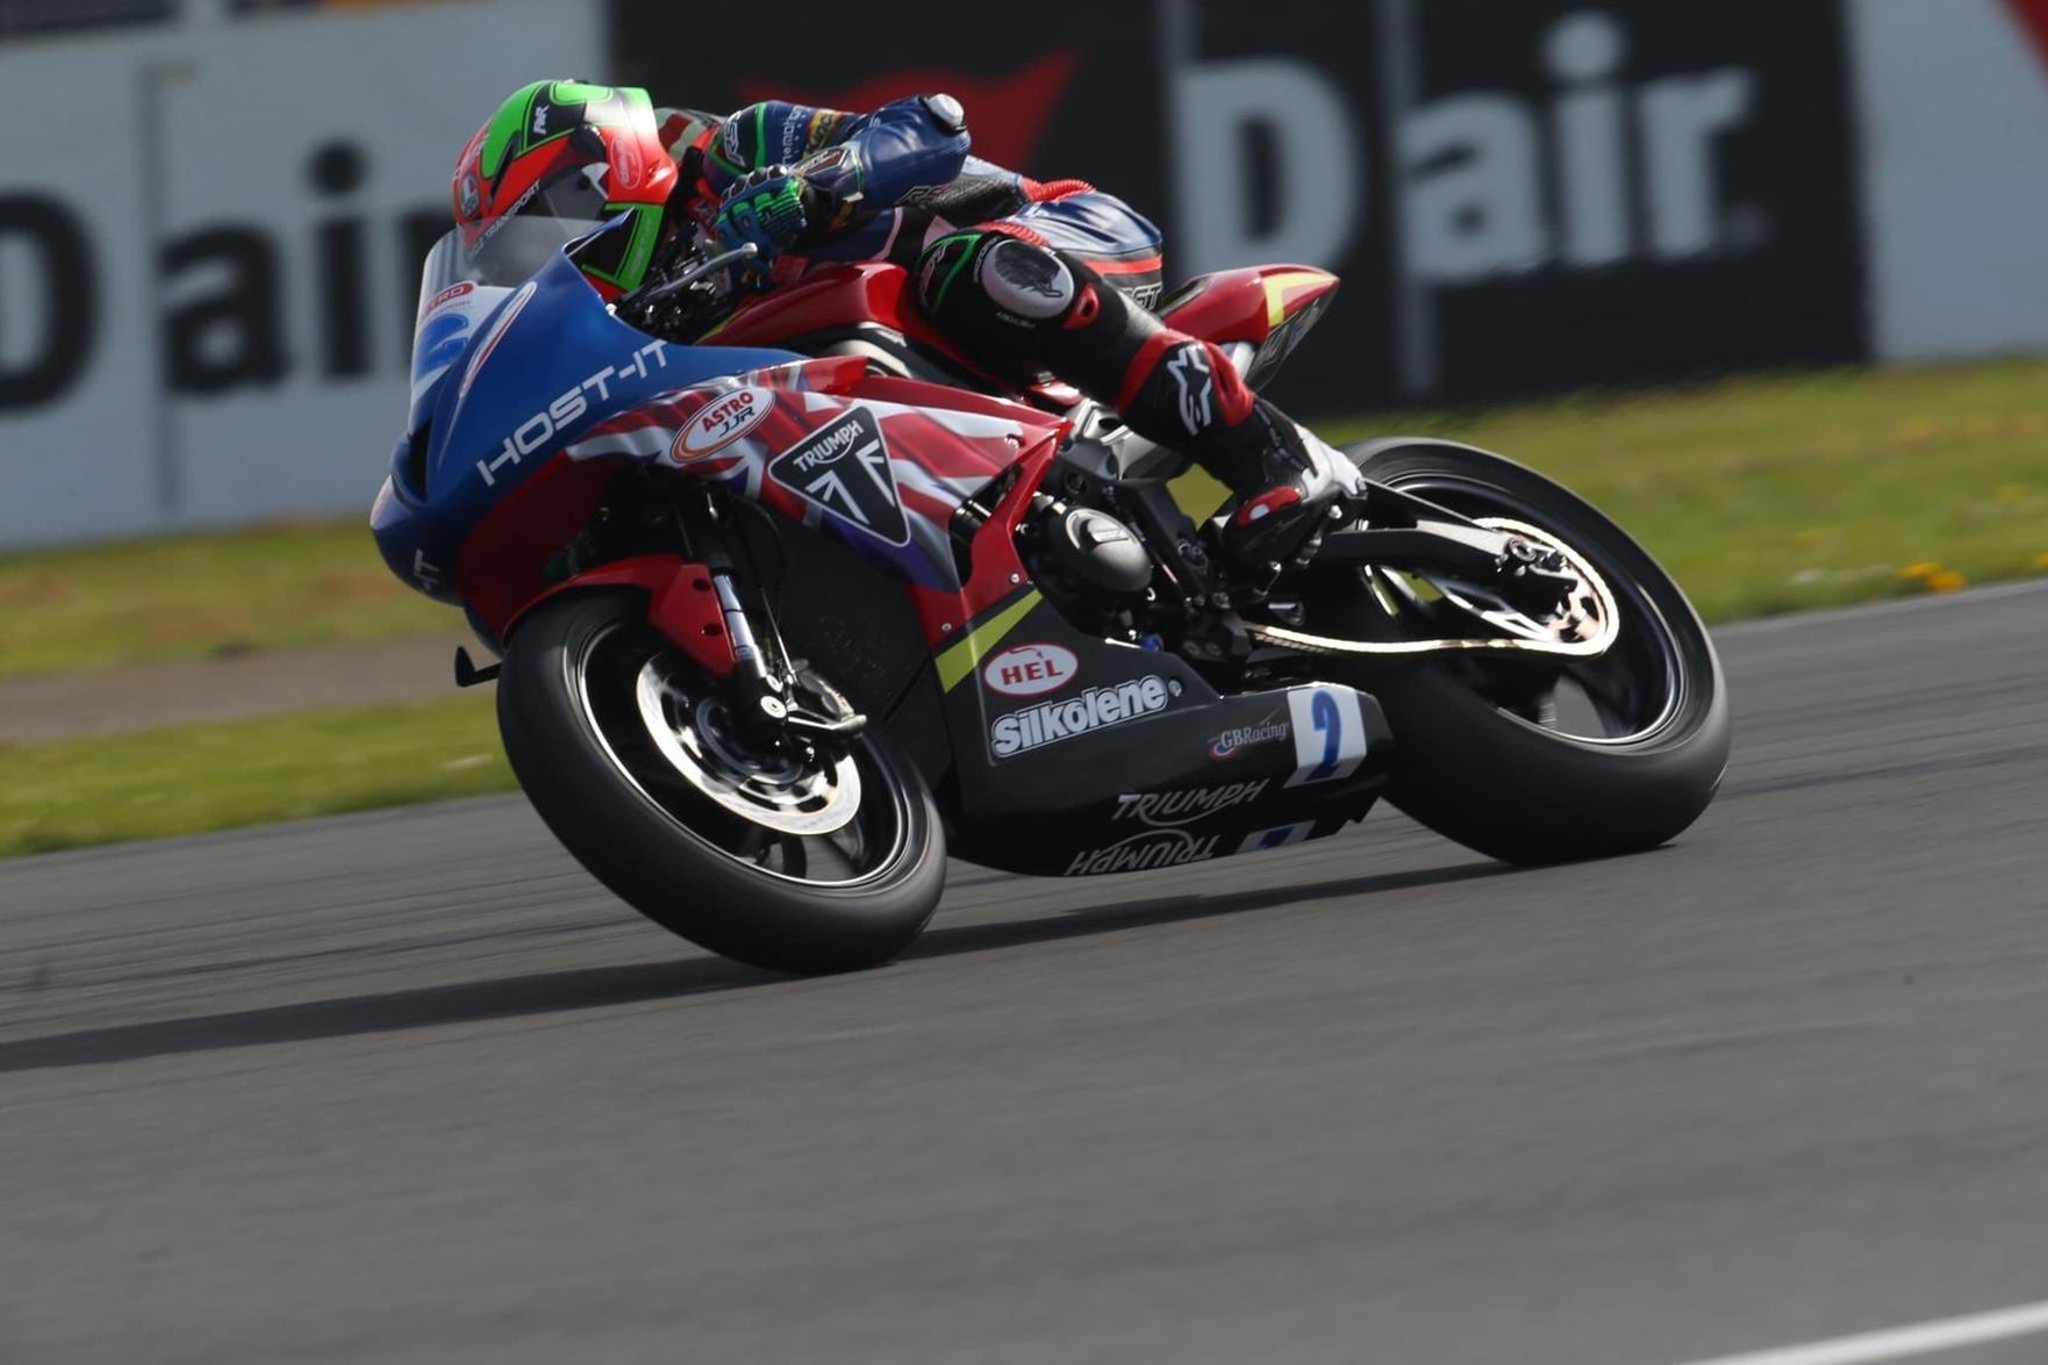 Organisers issue statement following red flag incident involving Josh Day and David Jones in British Supersport race at Donington Park